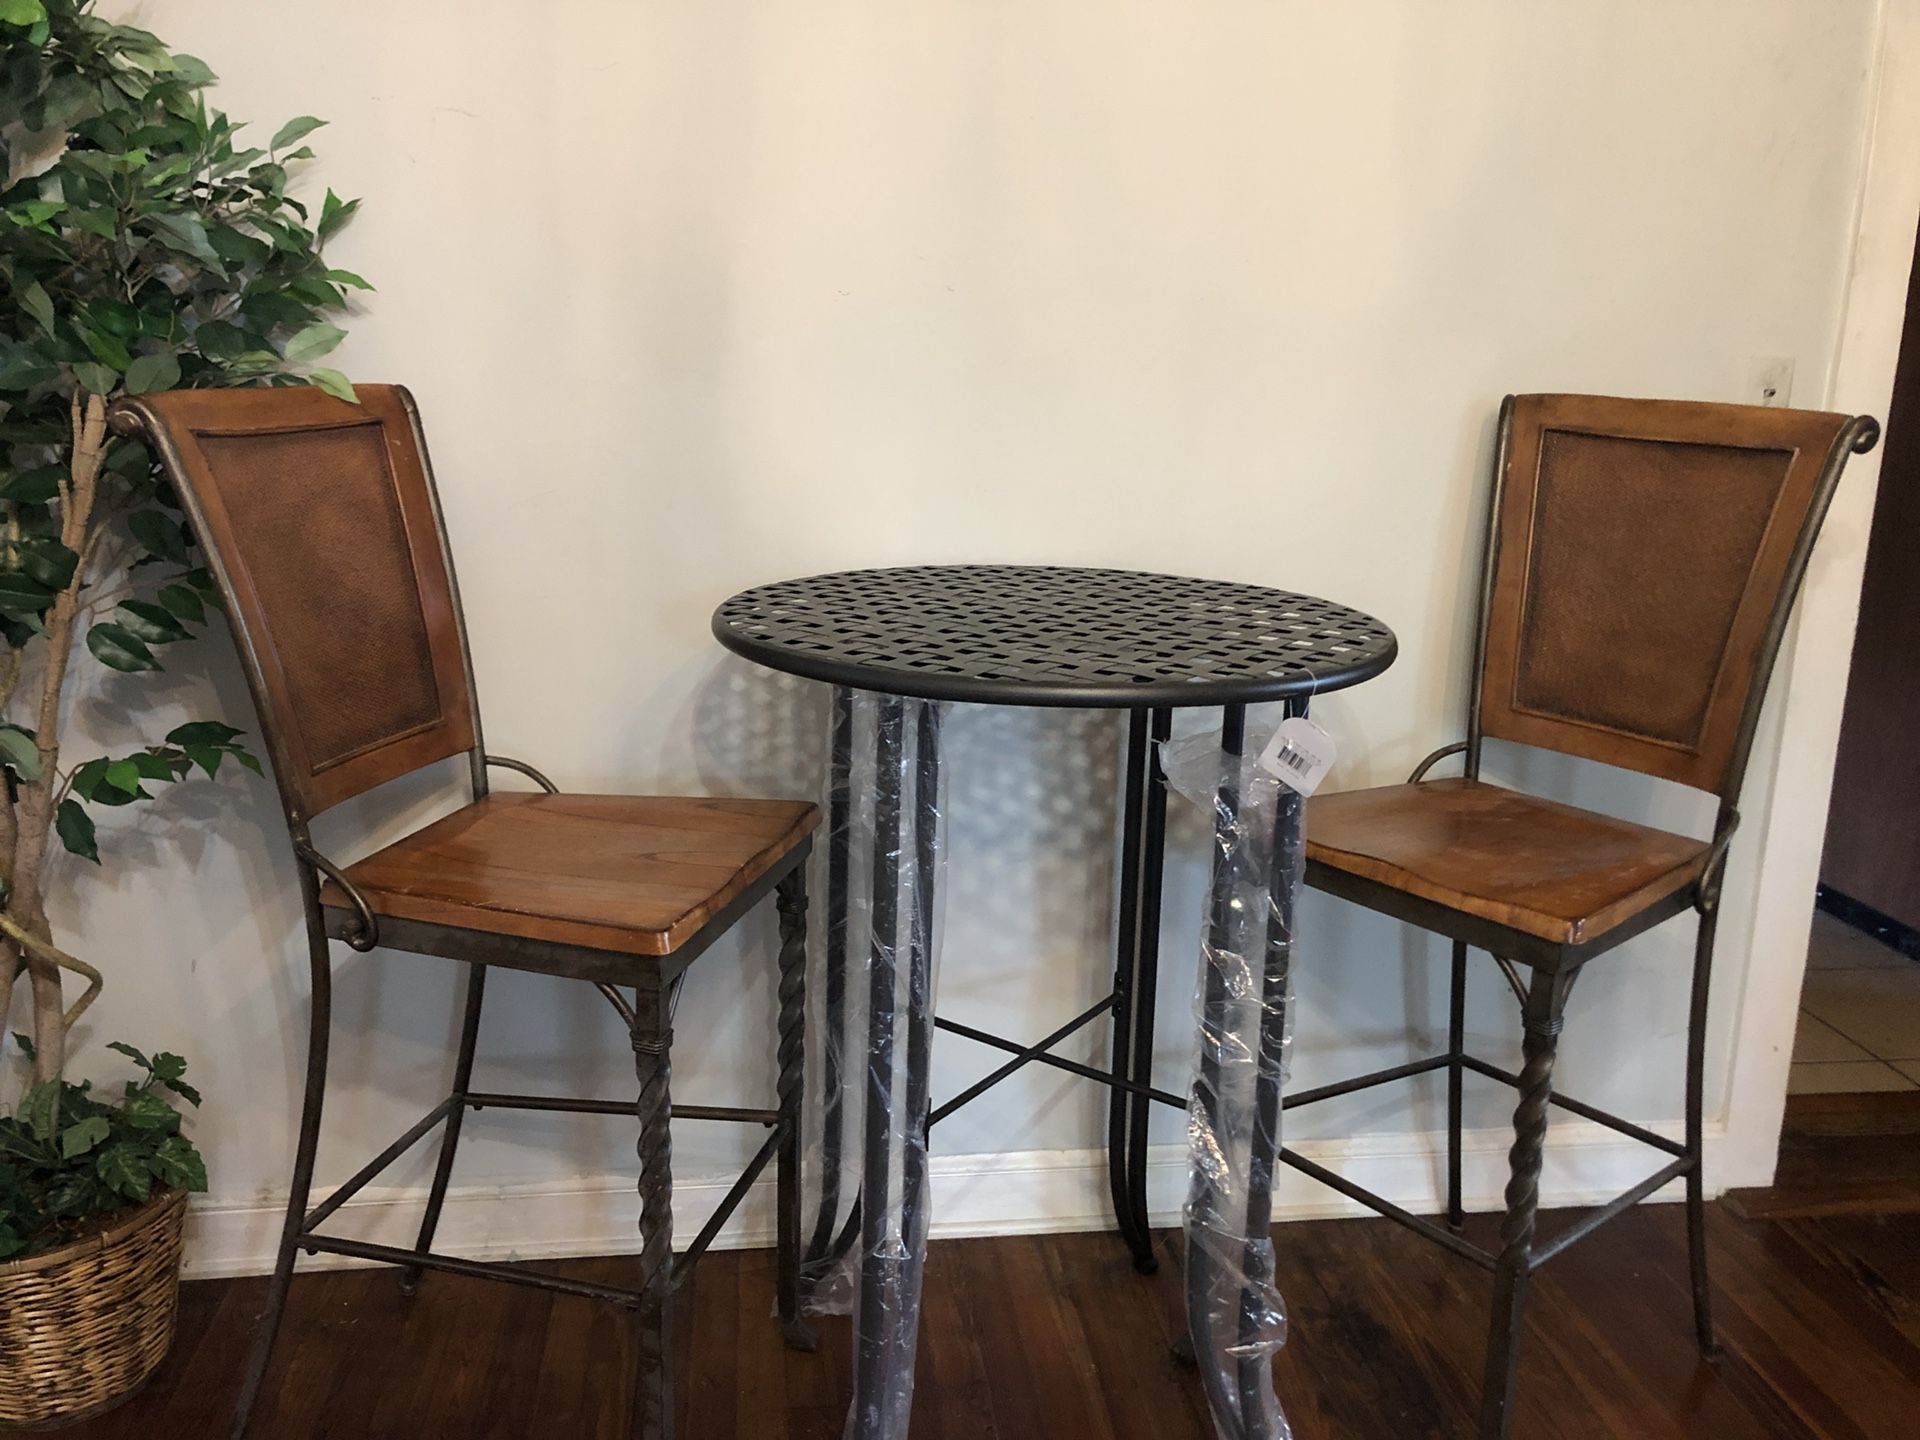 Bar chairs and Hight table